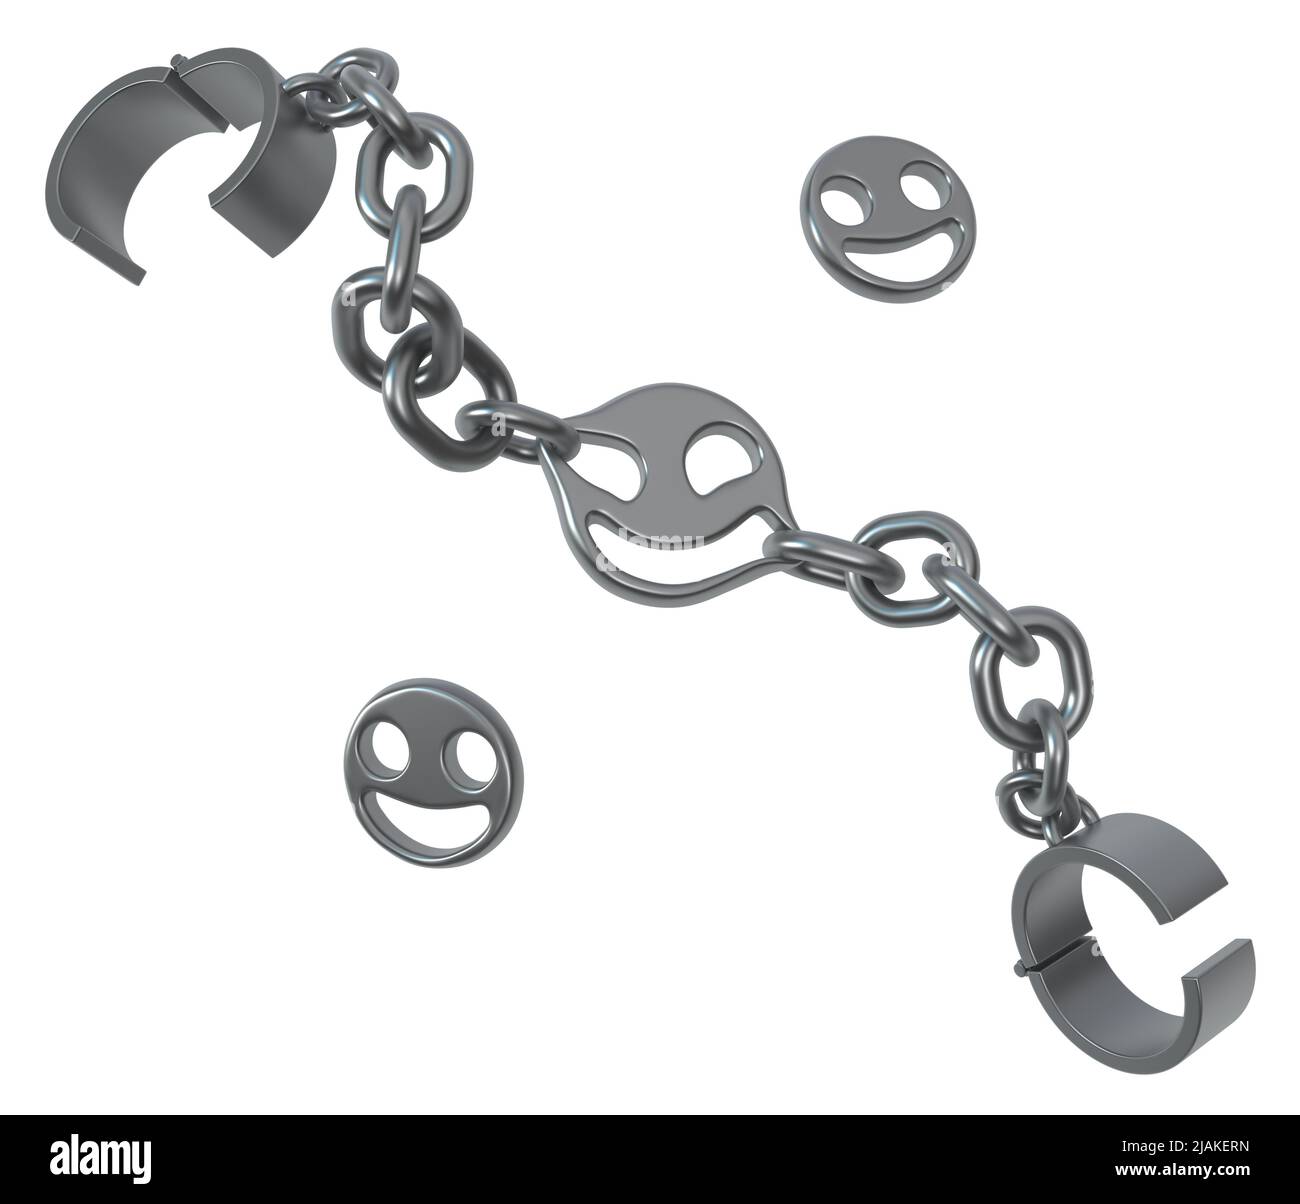 Shackles chain smiles discs grey metal 3d illustration, isolated, horizontal, over white Stock Photo